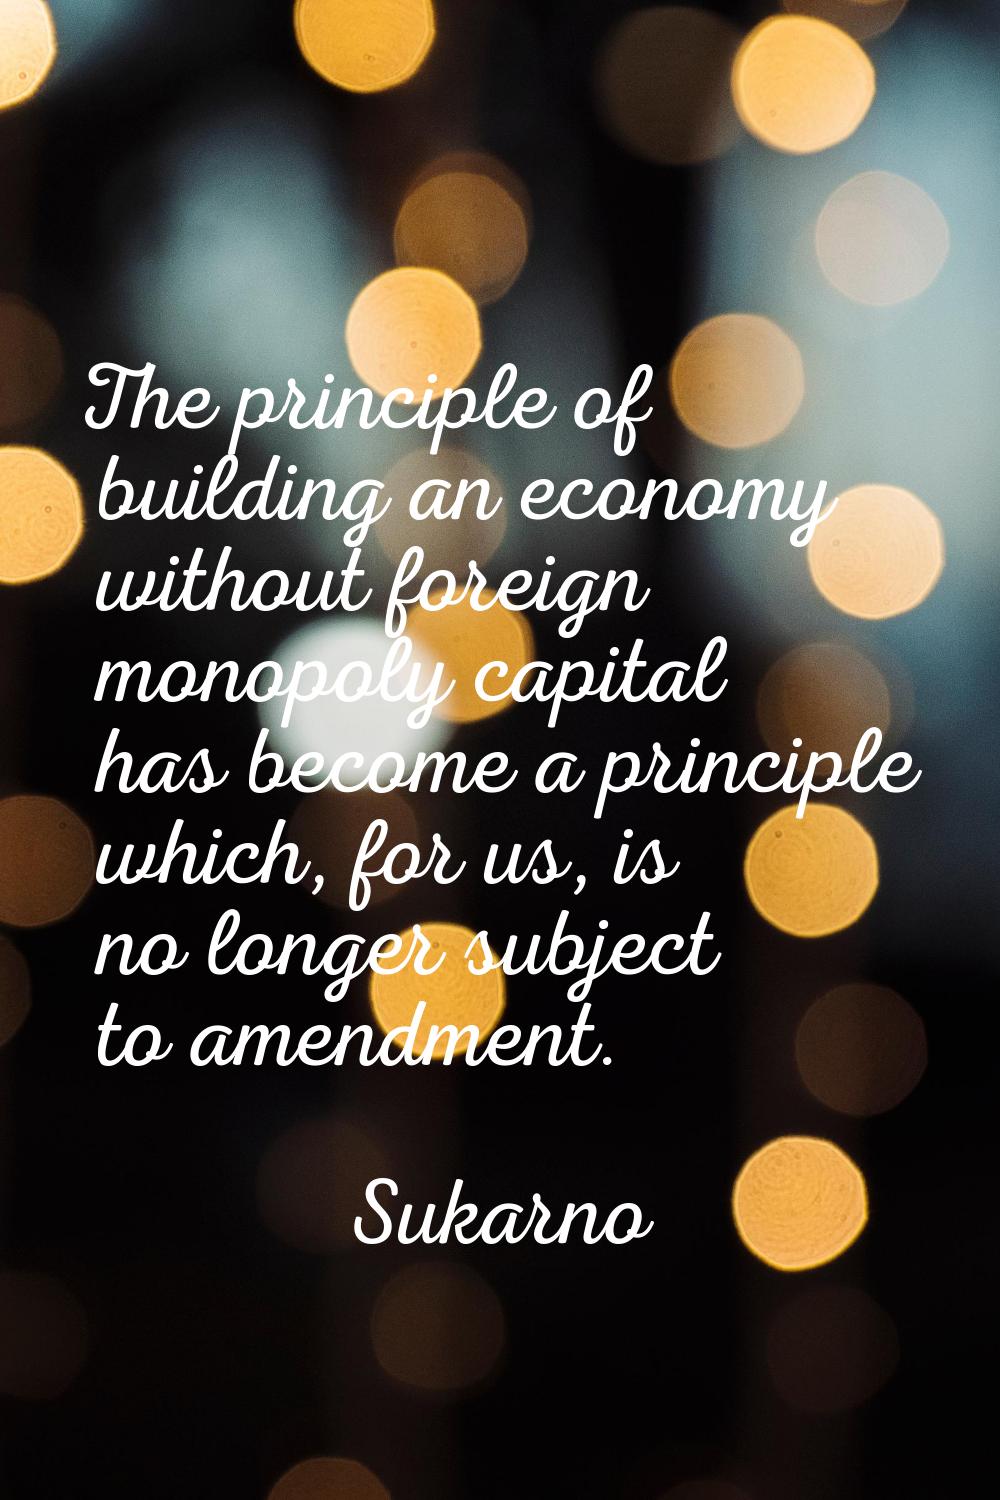 The principle of building an economy without foreign monopoly capital has become a principle which,